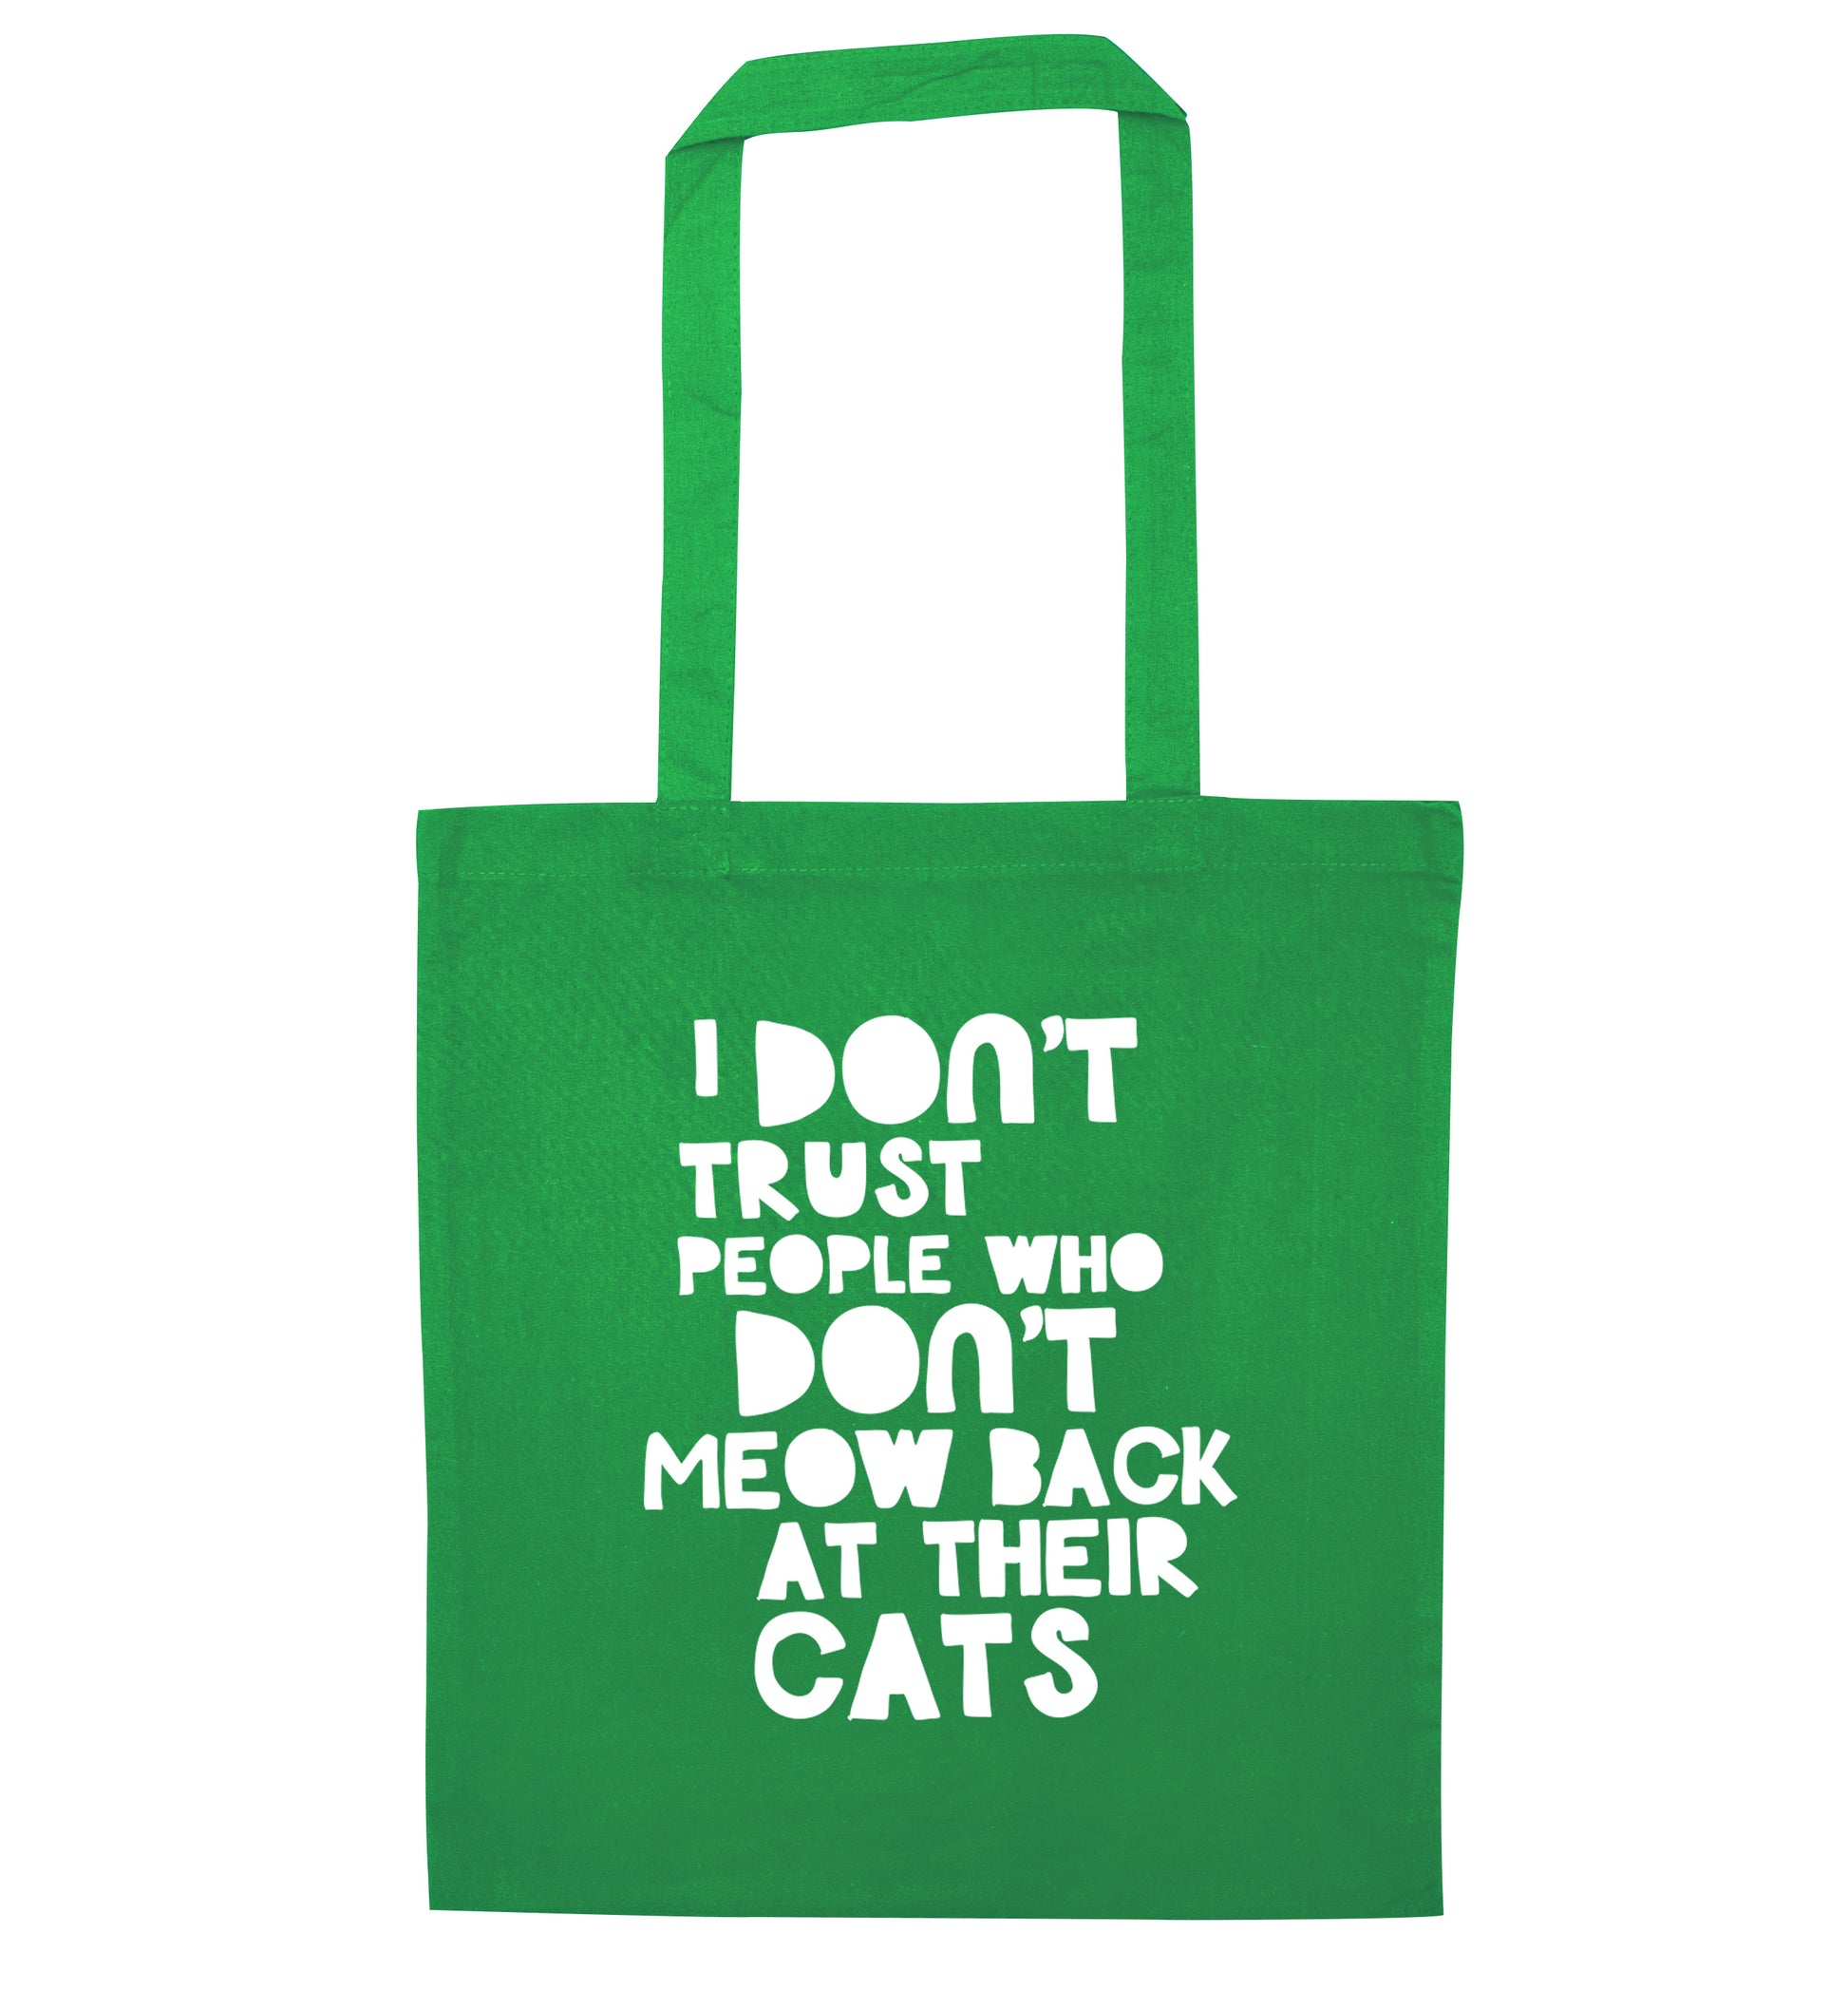 I don't trust people who don't meow back at their cats green tote bag